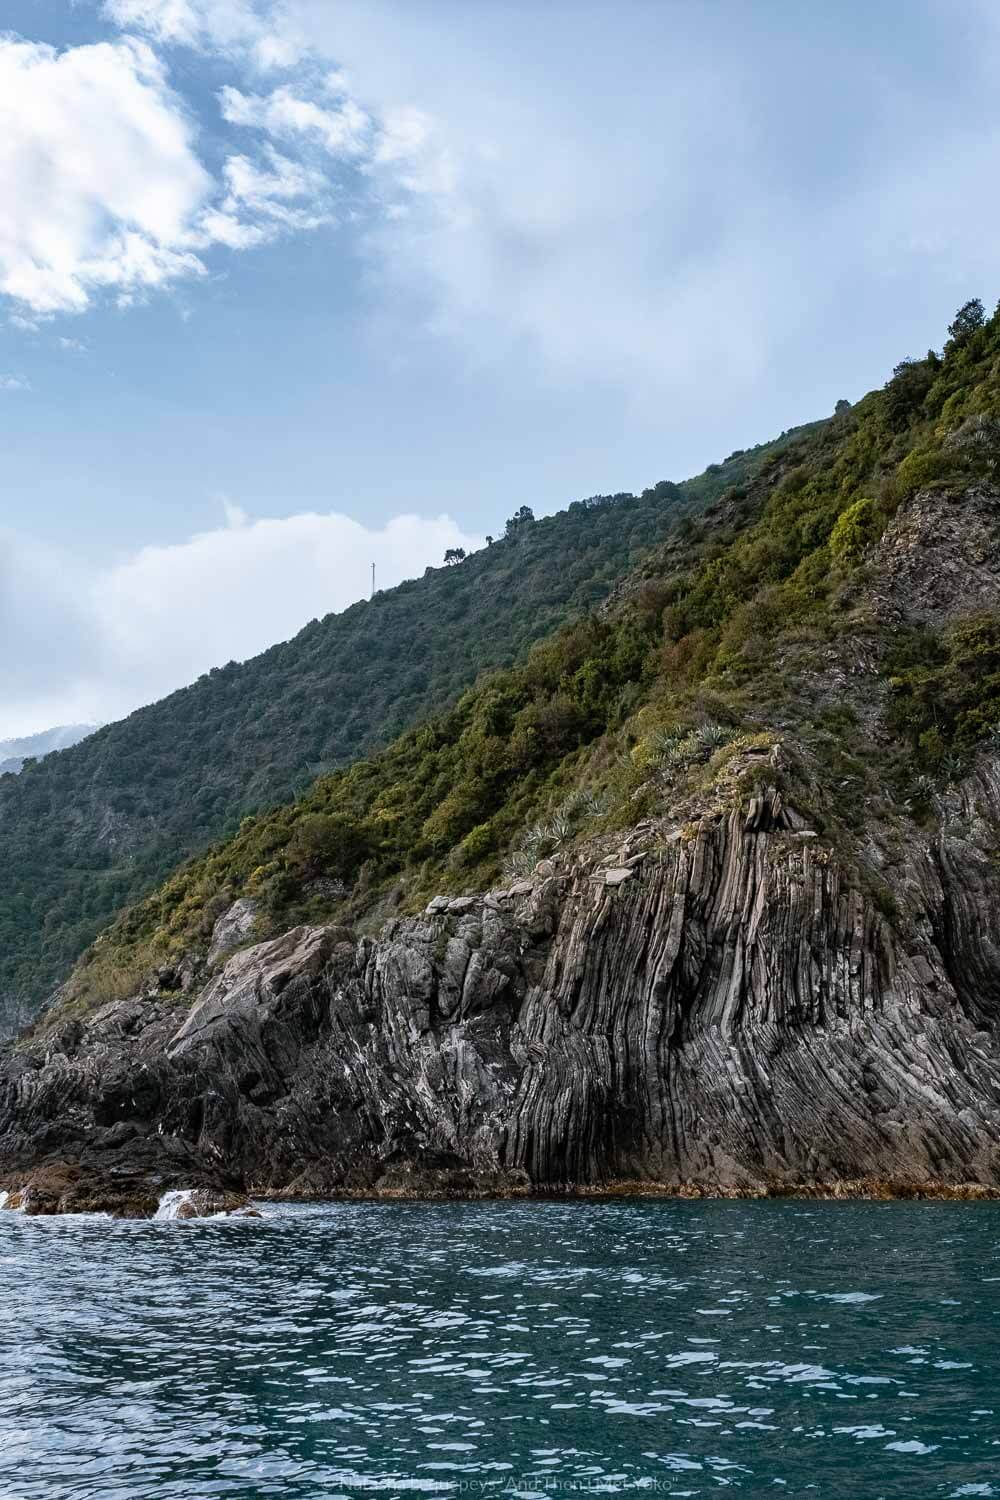 Rock formation of the cliffs, Cinque Terre. Travel photography and guide by © Natasha Lequepeys for "And Then I Met Yoko". #cinqueterre #italy #travelphotography